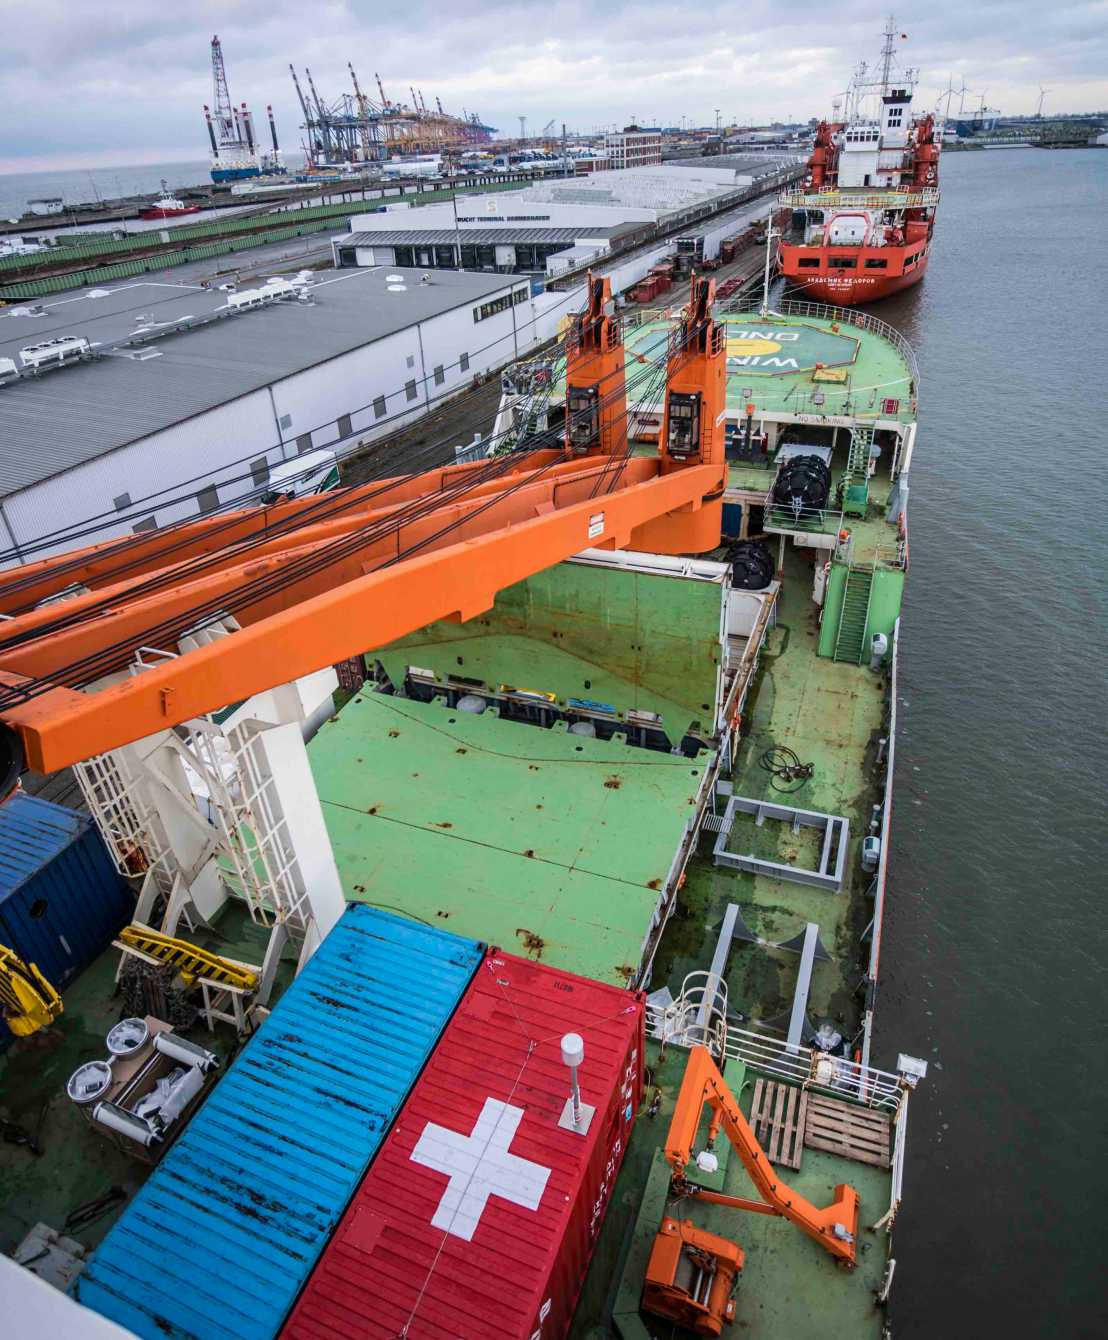 View from the top deck: The Swiss measuring container.